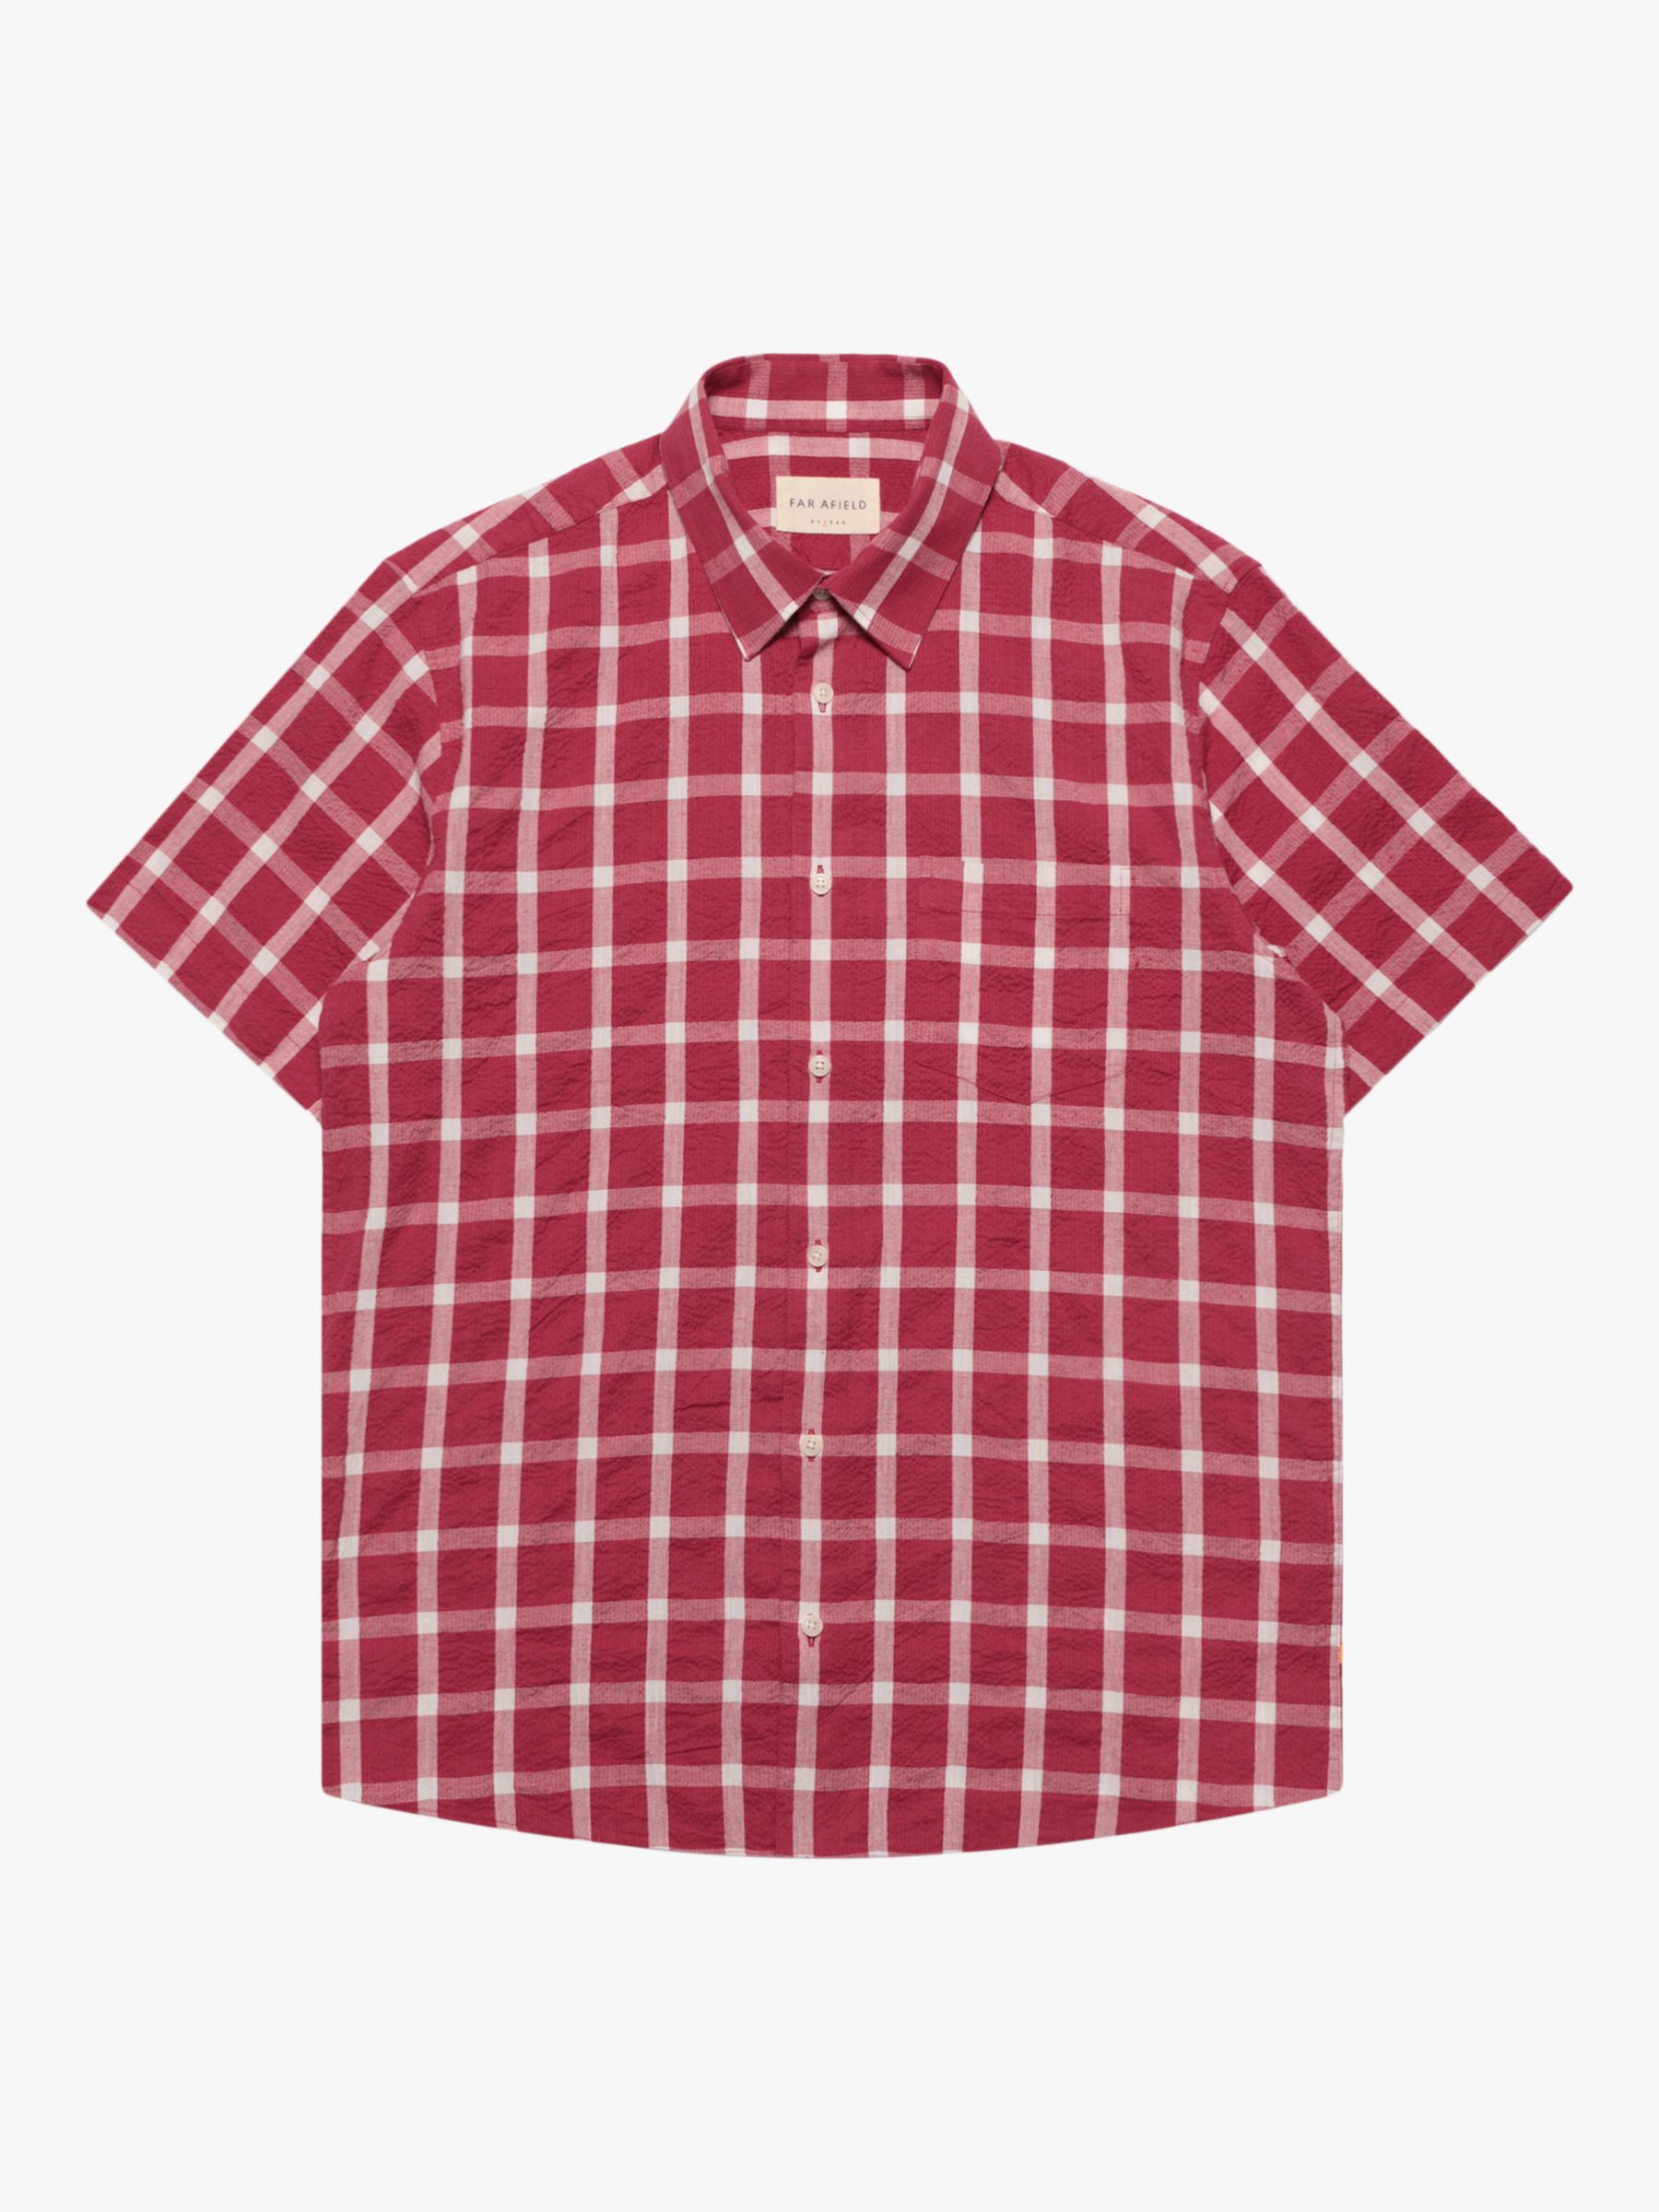 Far Afield Classic Checked Short Sleeve Shirt, Red/Multi, S